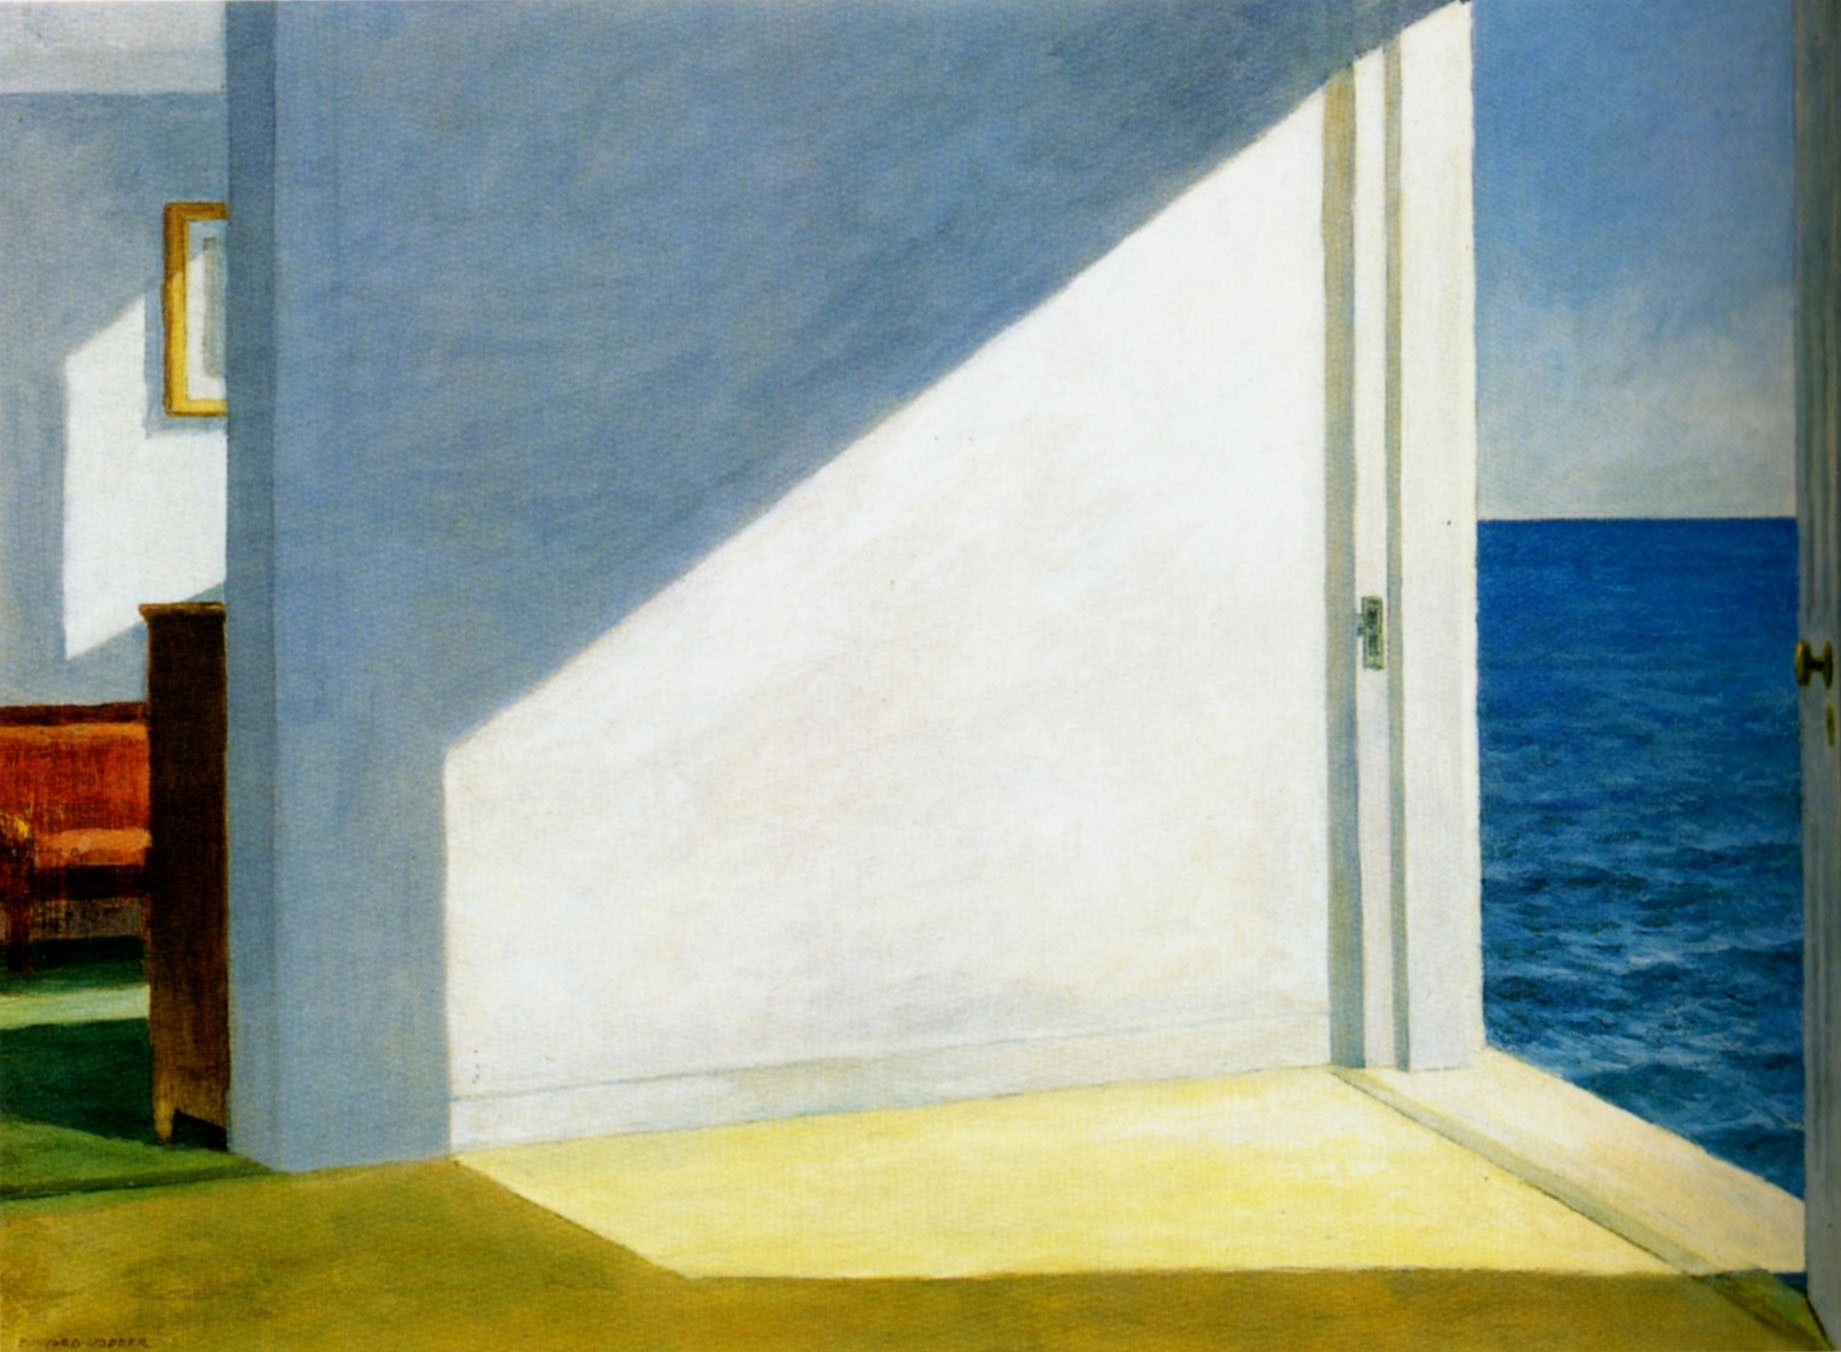 Edward Hopper Rooms by the sea